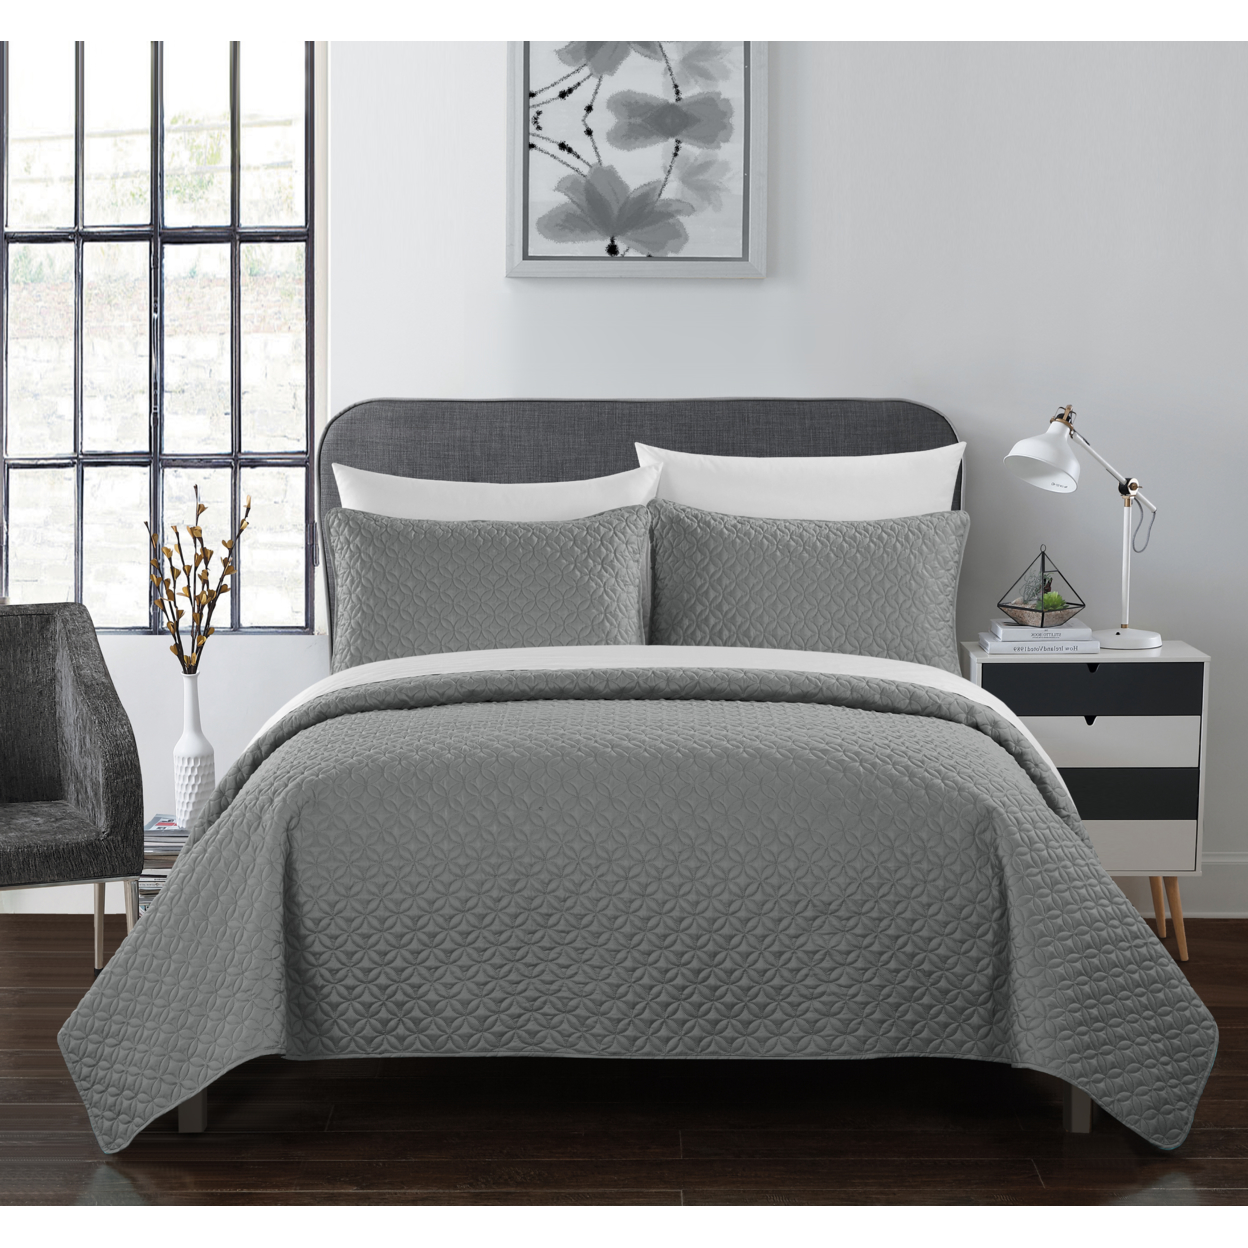 Gideon 3 Or 2 Piece Quilt Cover Set Rose Star Geometric Quilted Bedding - Grey, King